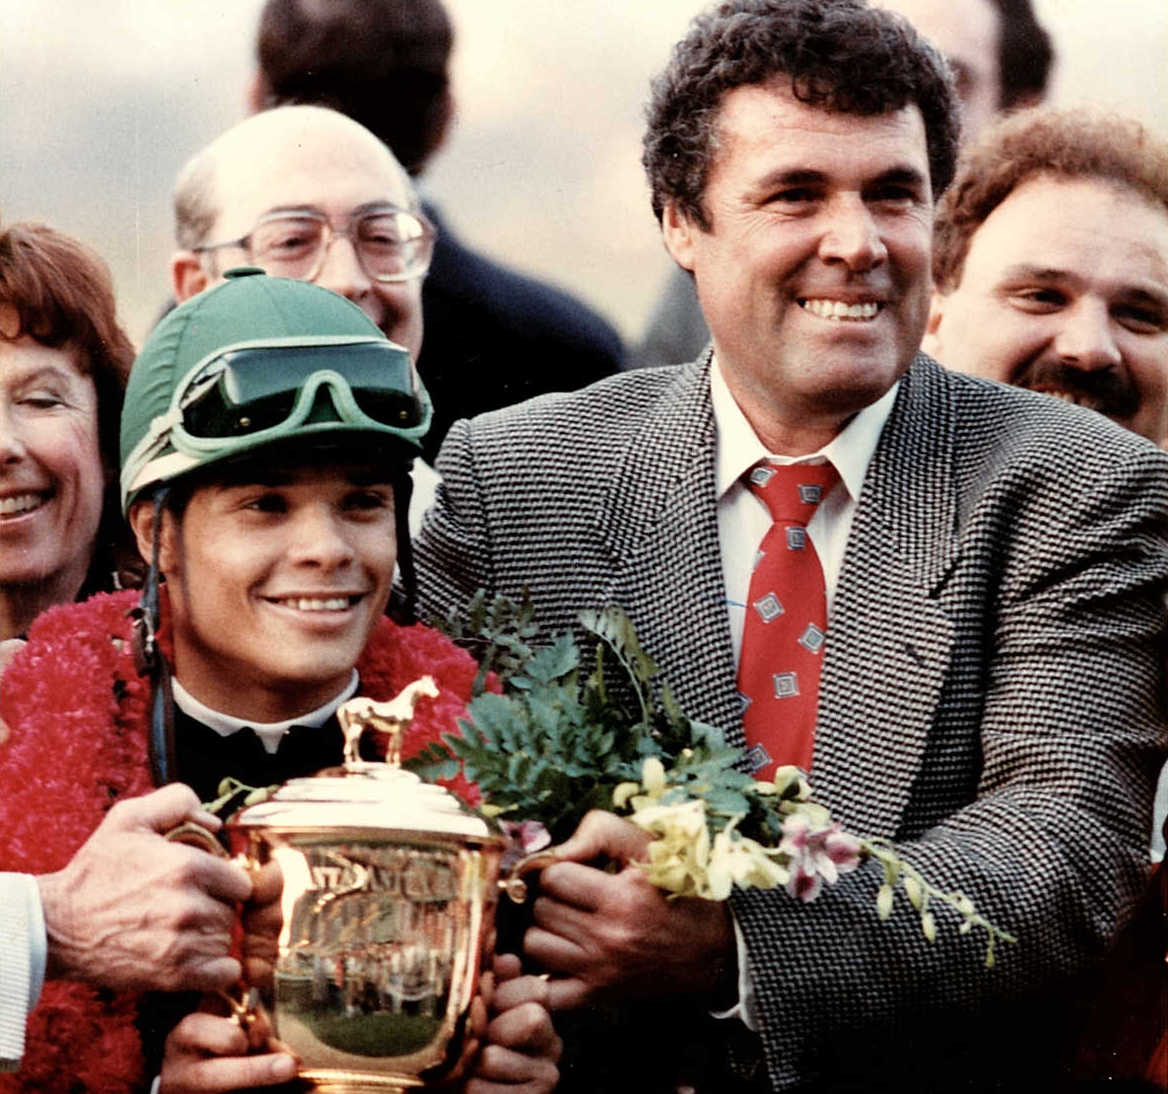 Julio Canani in 1989 with jockey Martin Pedroza after rank outsider Martial Law’s win in the Santa Anita Handicap. Photo: Team Valor International